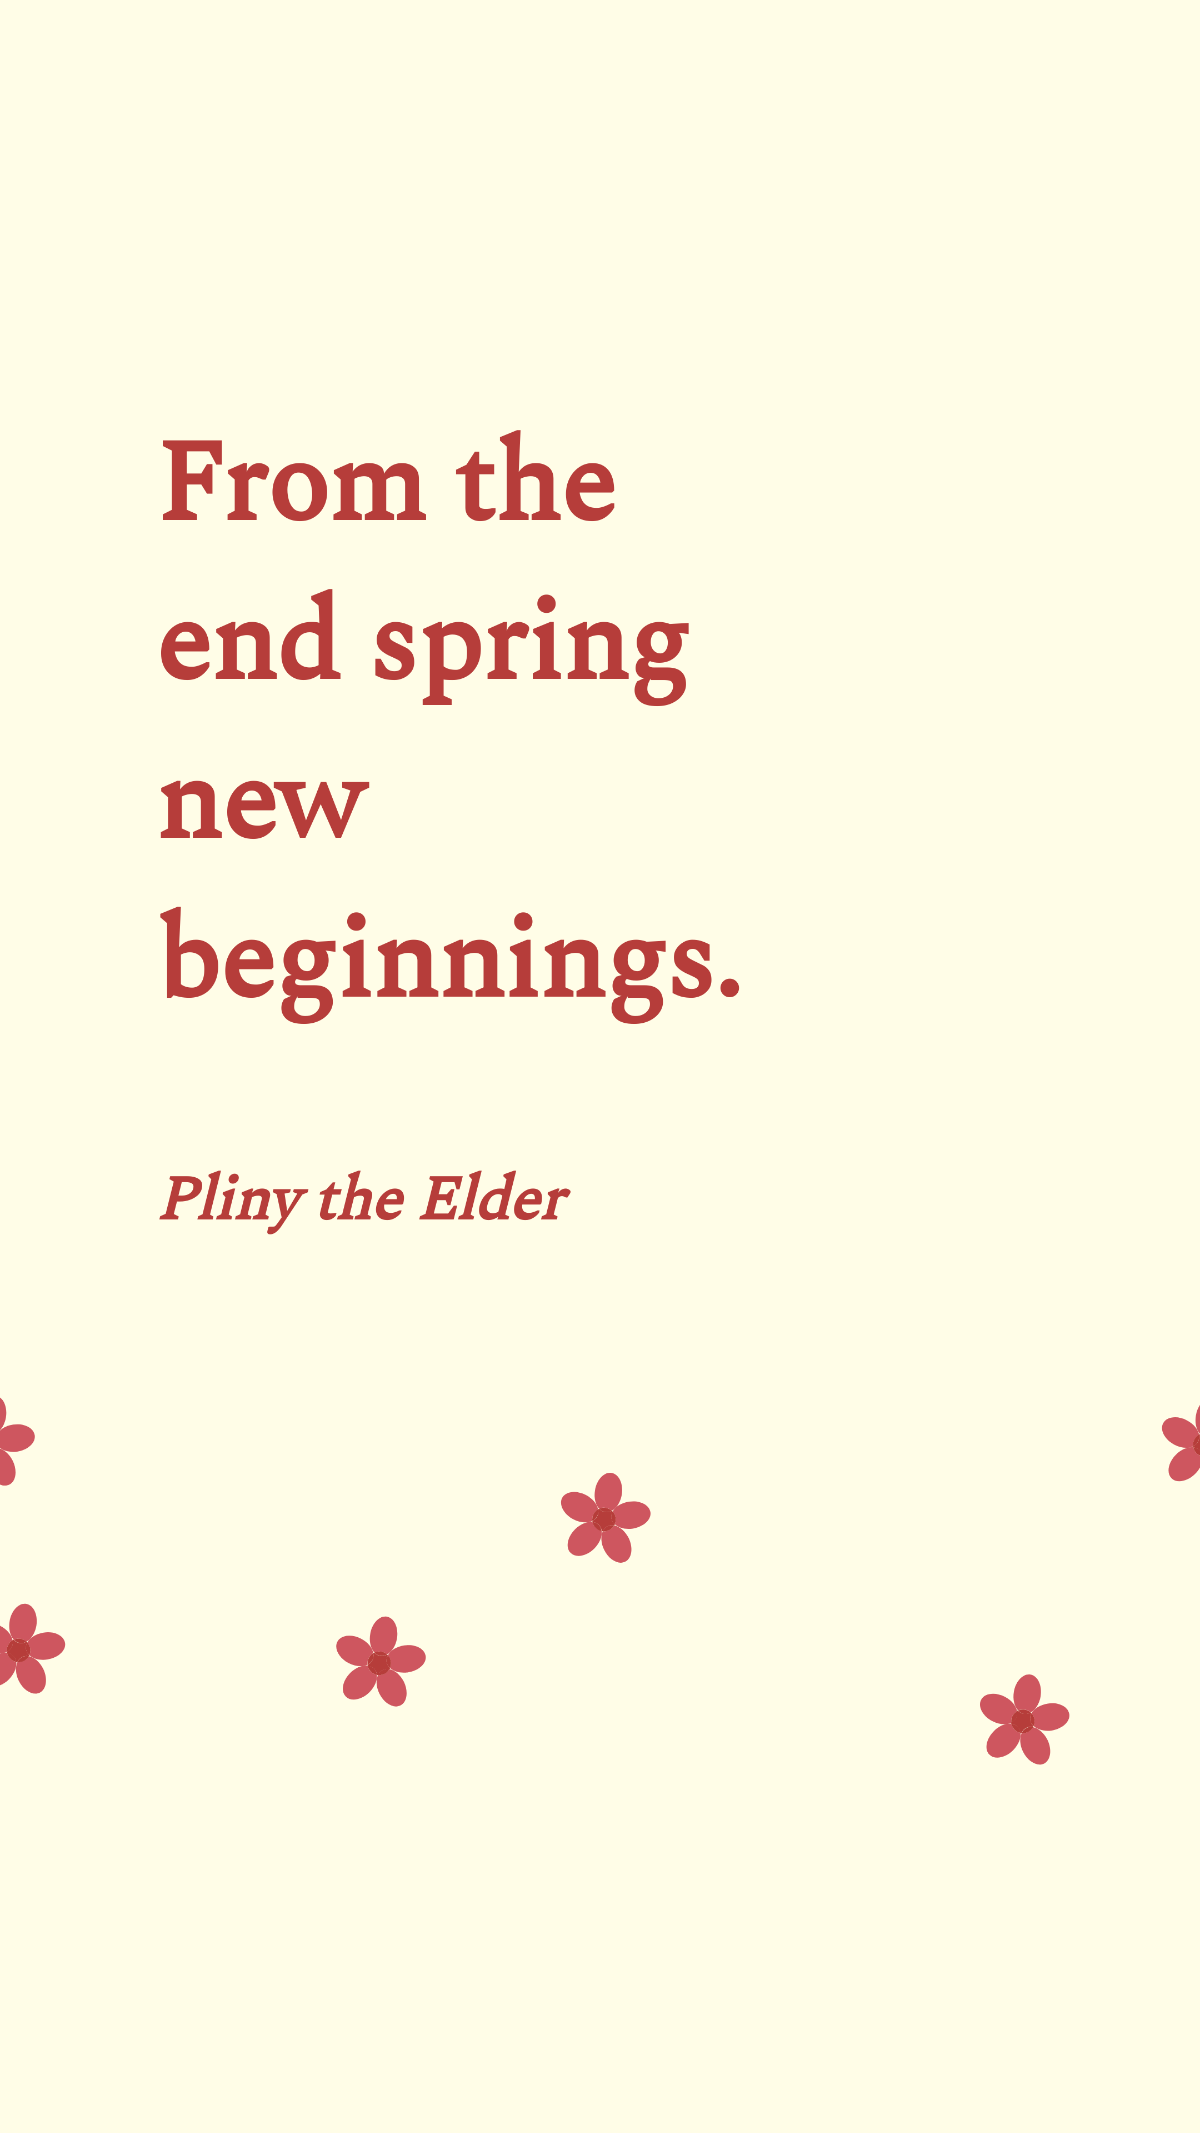 Pliny the Elder - From the end spring new beginnings. Template